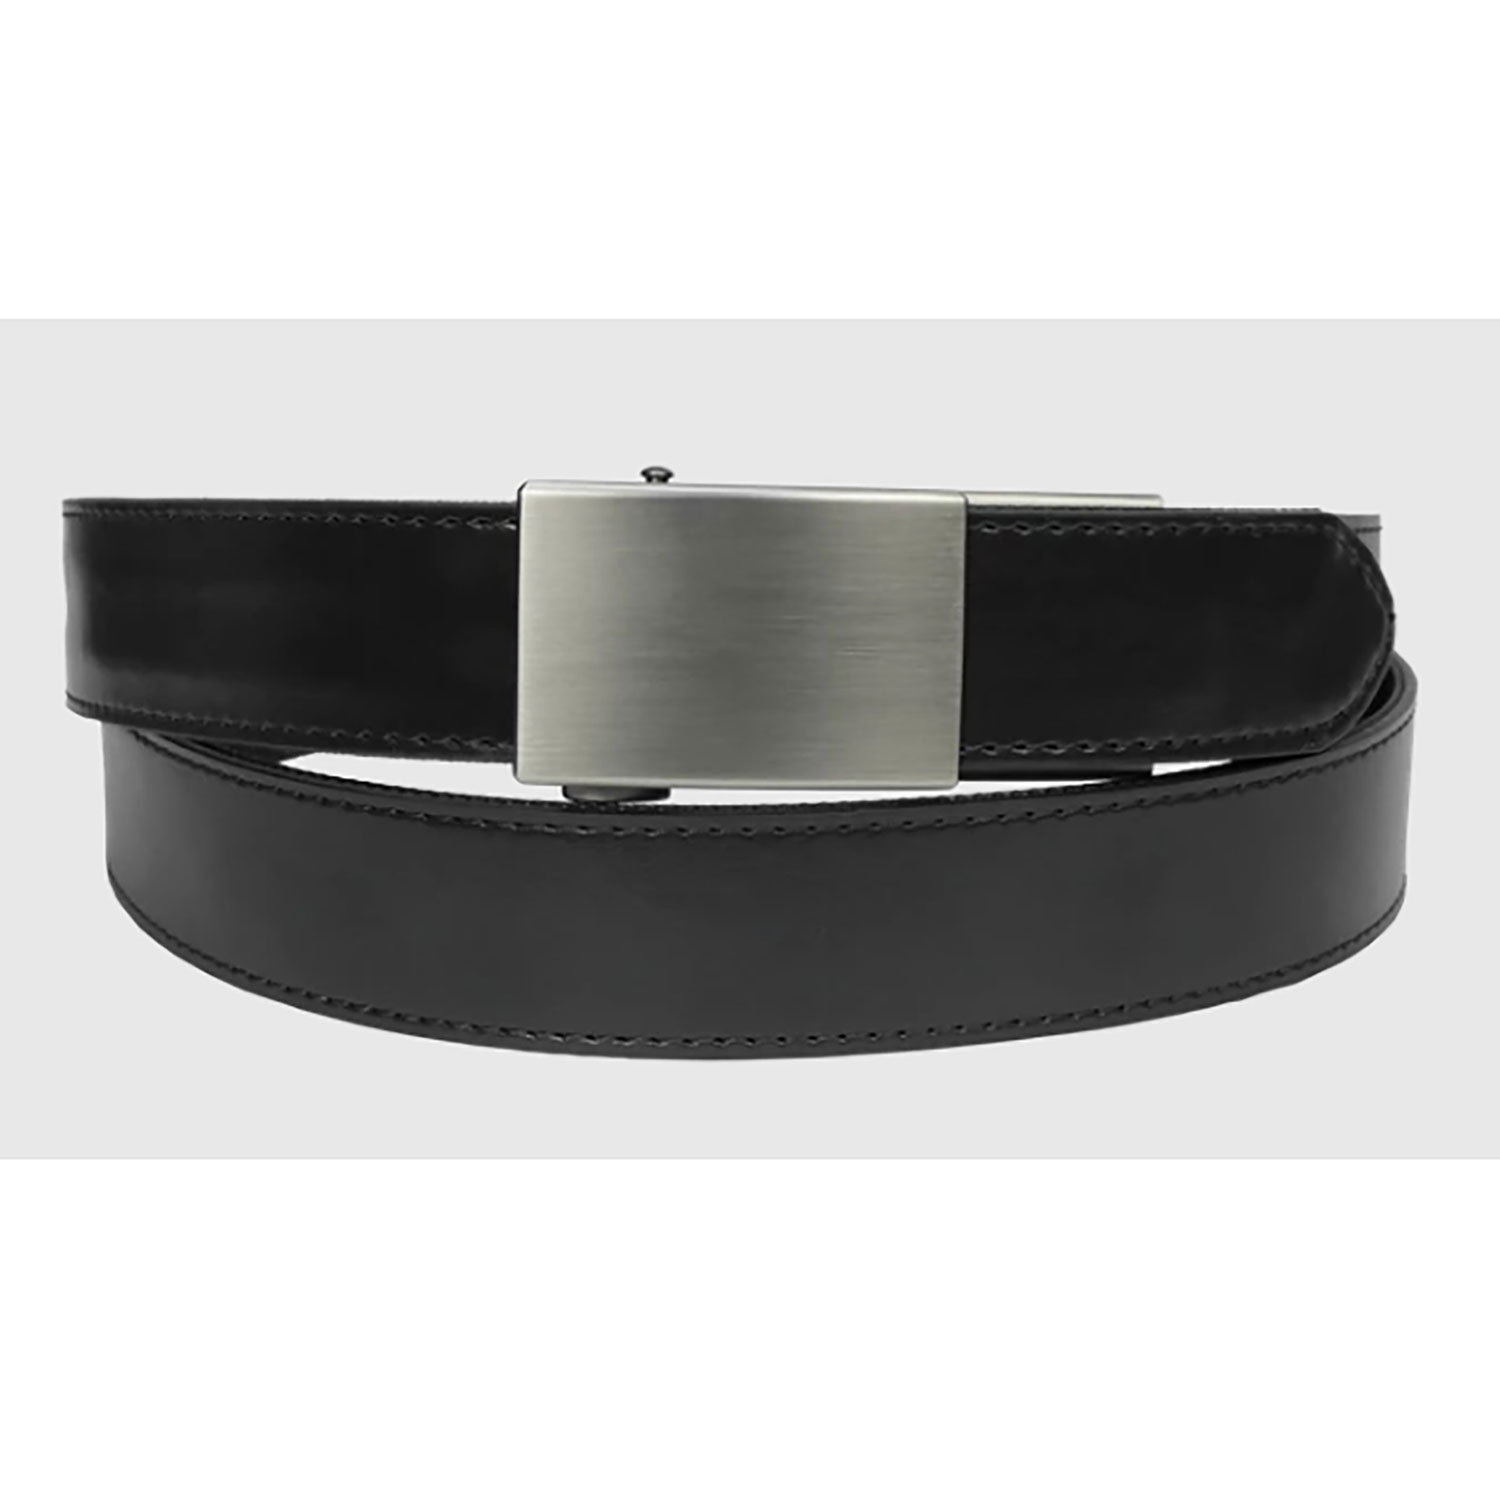 Blade-Tech Ultimate Carry Leather Belt